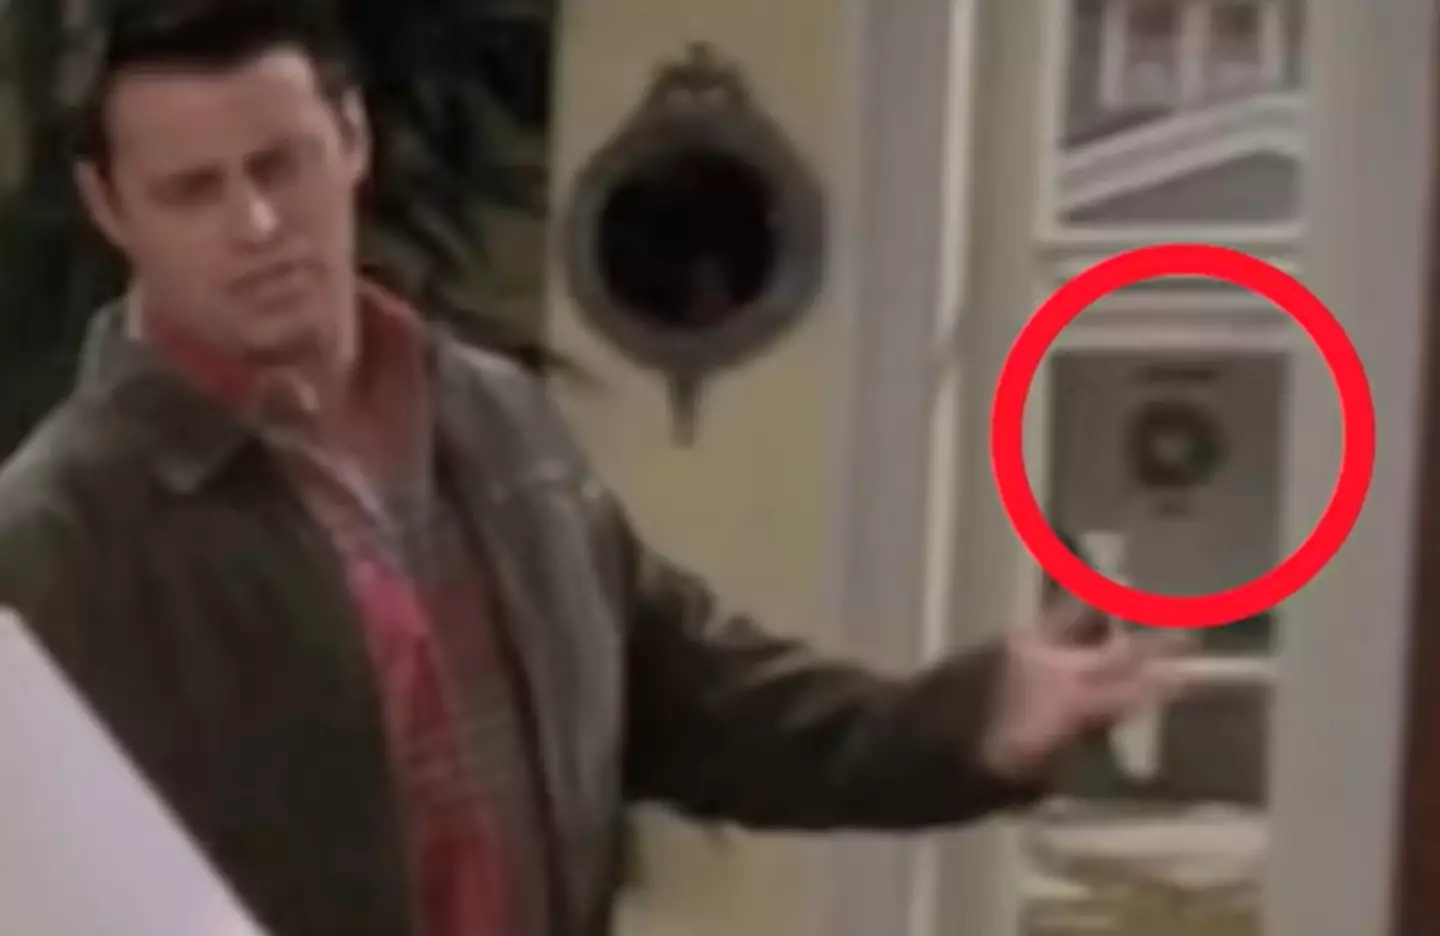 Chandler even points to the wreath across the street.